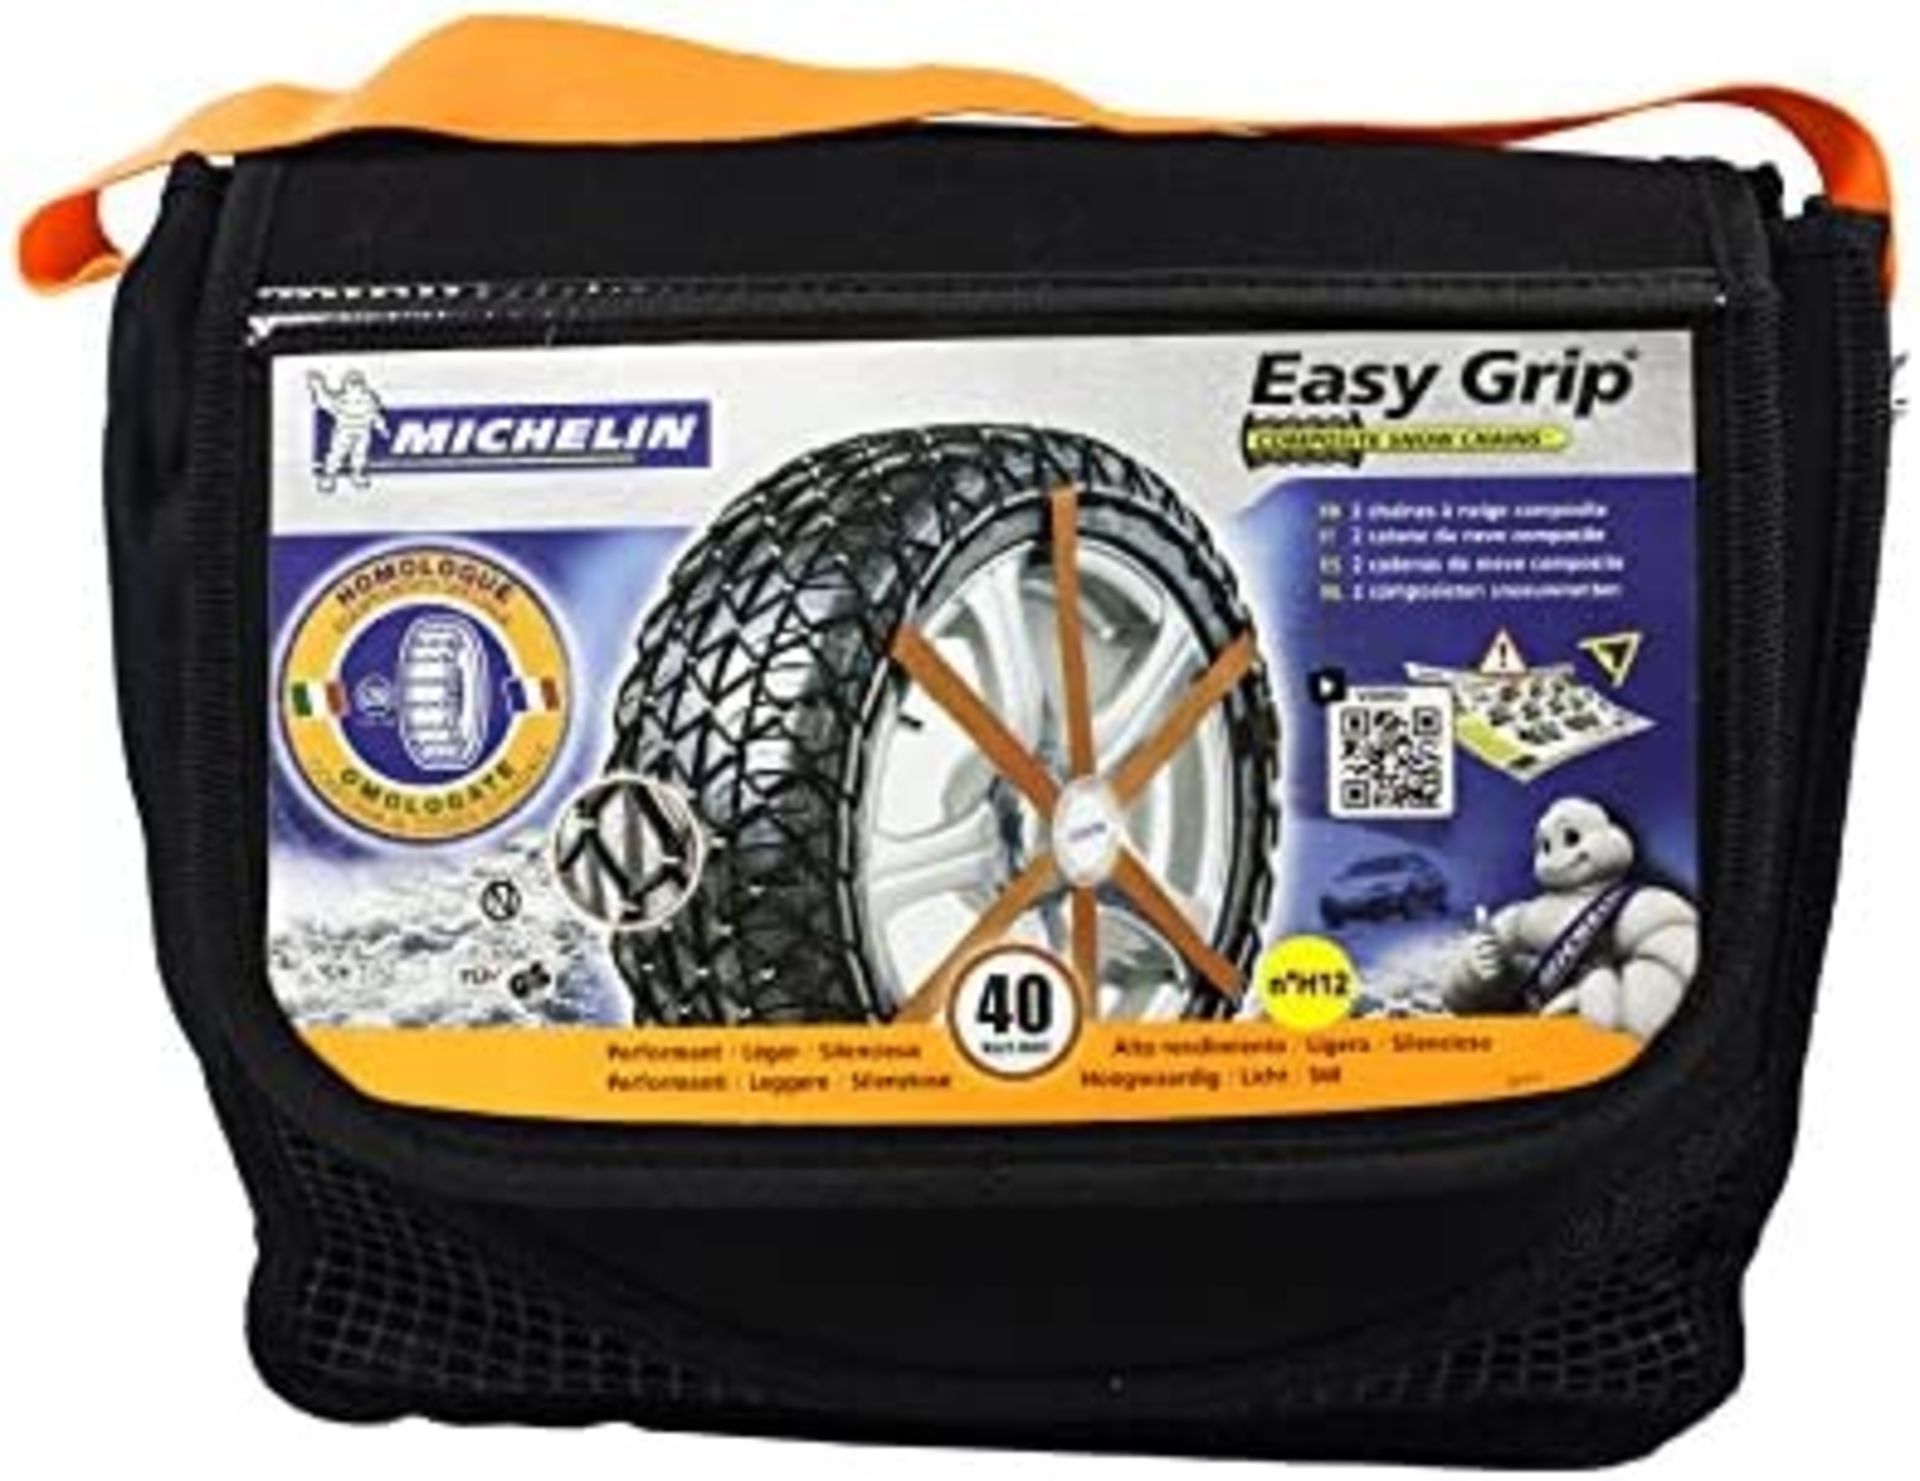 5 X NEW PACKAGED SETS OF MICHELIN 7901 Easy Grip Snow Chains H12. RRP £82.95 EACH. Michelin 7901